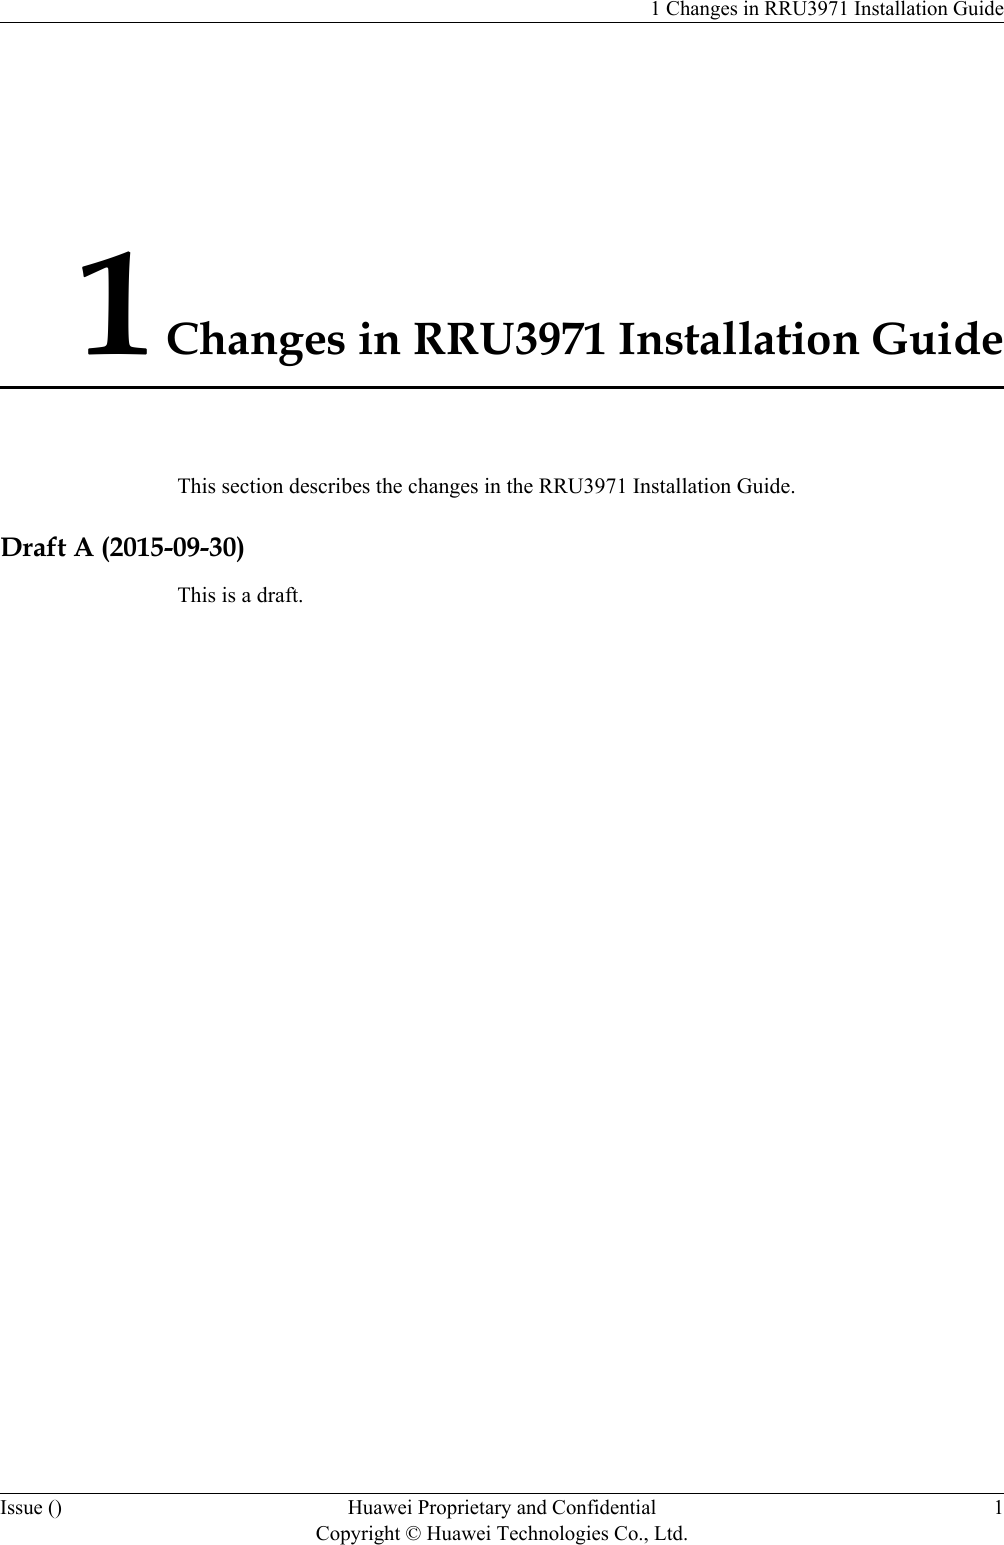 1 Changes in RRU3971 Installation GuideThis section describes the changes in the RRU3971 Installation Guide.Draft A (2015-09-30)This is a draft.1 Changes in RRU3971 Installation GuideIssue () Huawei Proprietary and ConfidentialCopyright © Huawei Technologies Co., Ltd.1